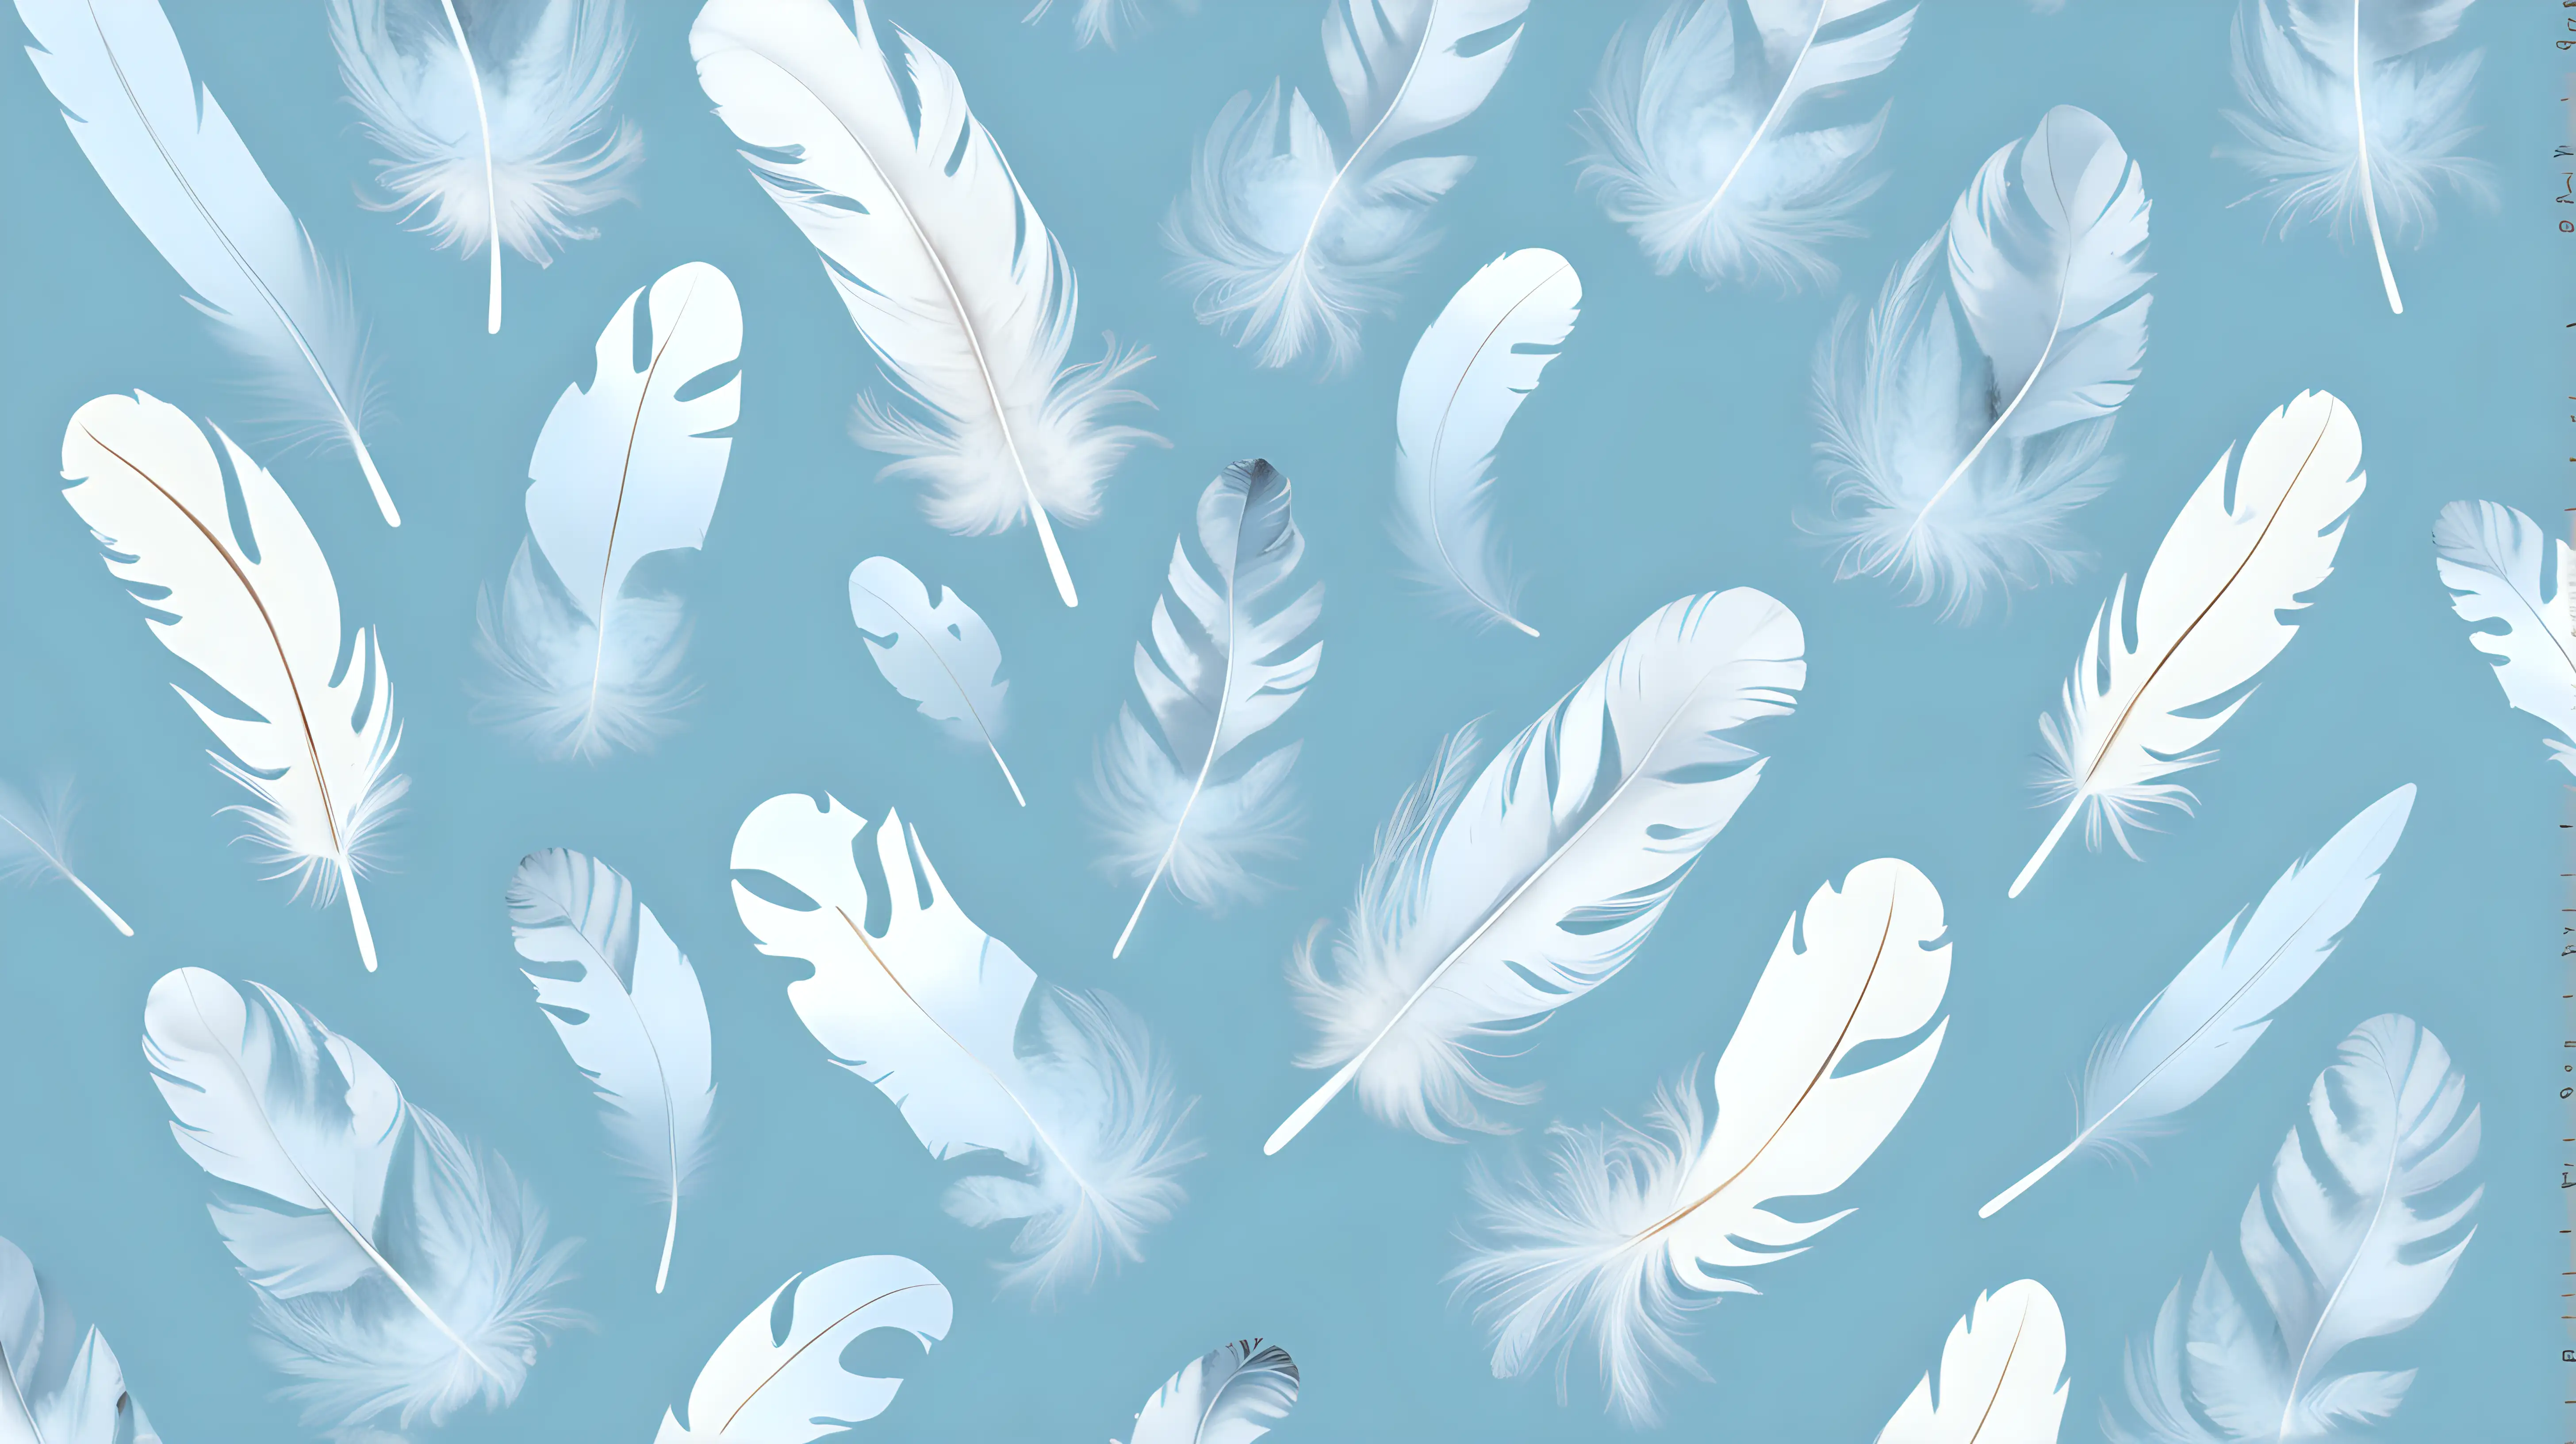 Ethereal Feather Dance Delicate Feathers Floating on a Pale Blue Canvas